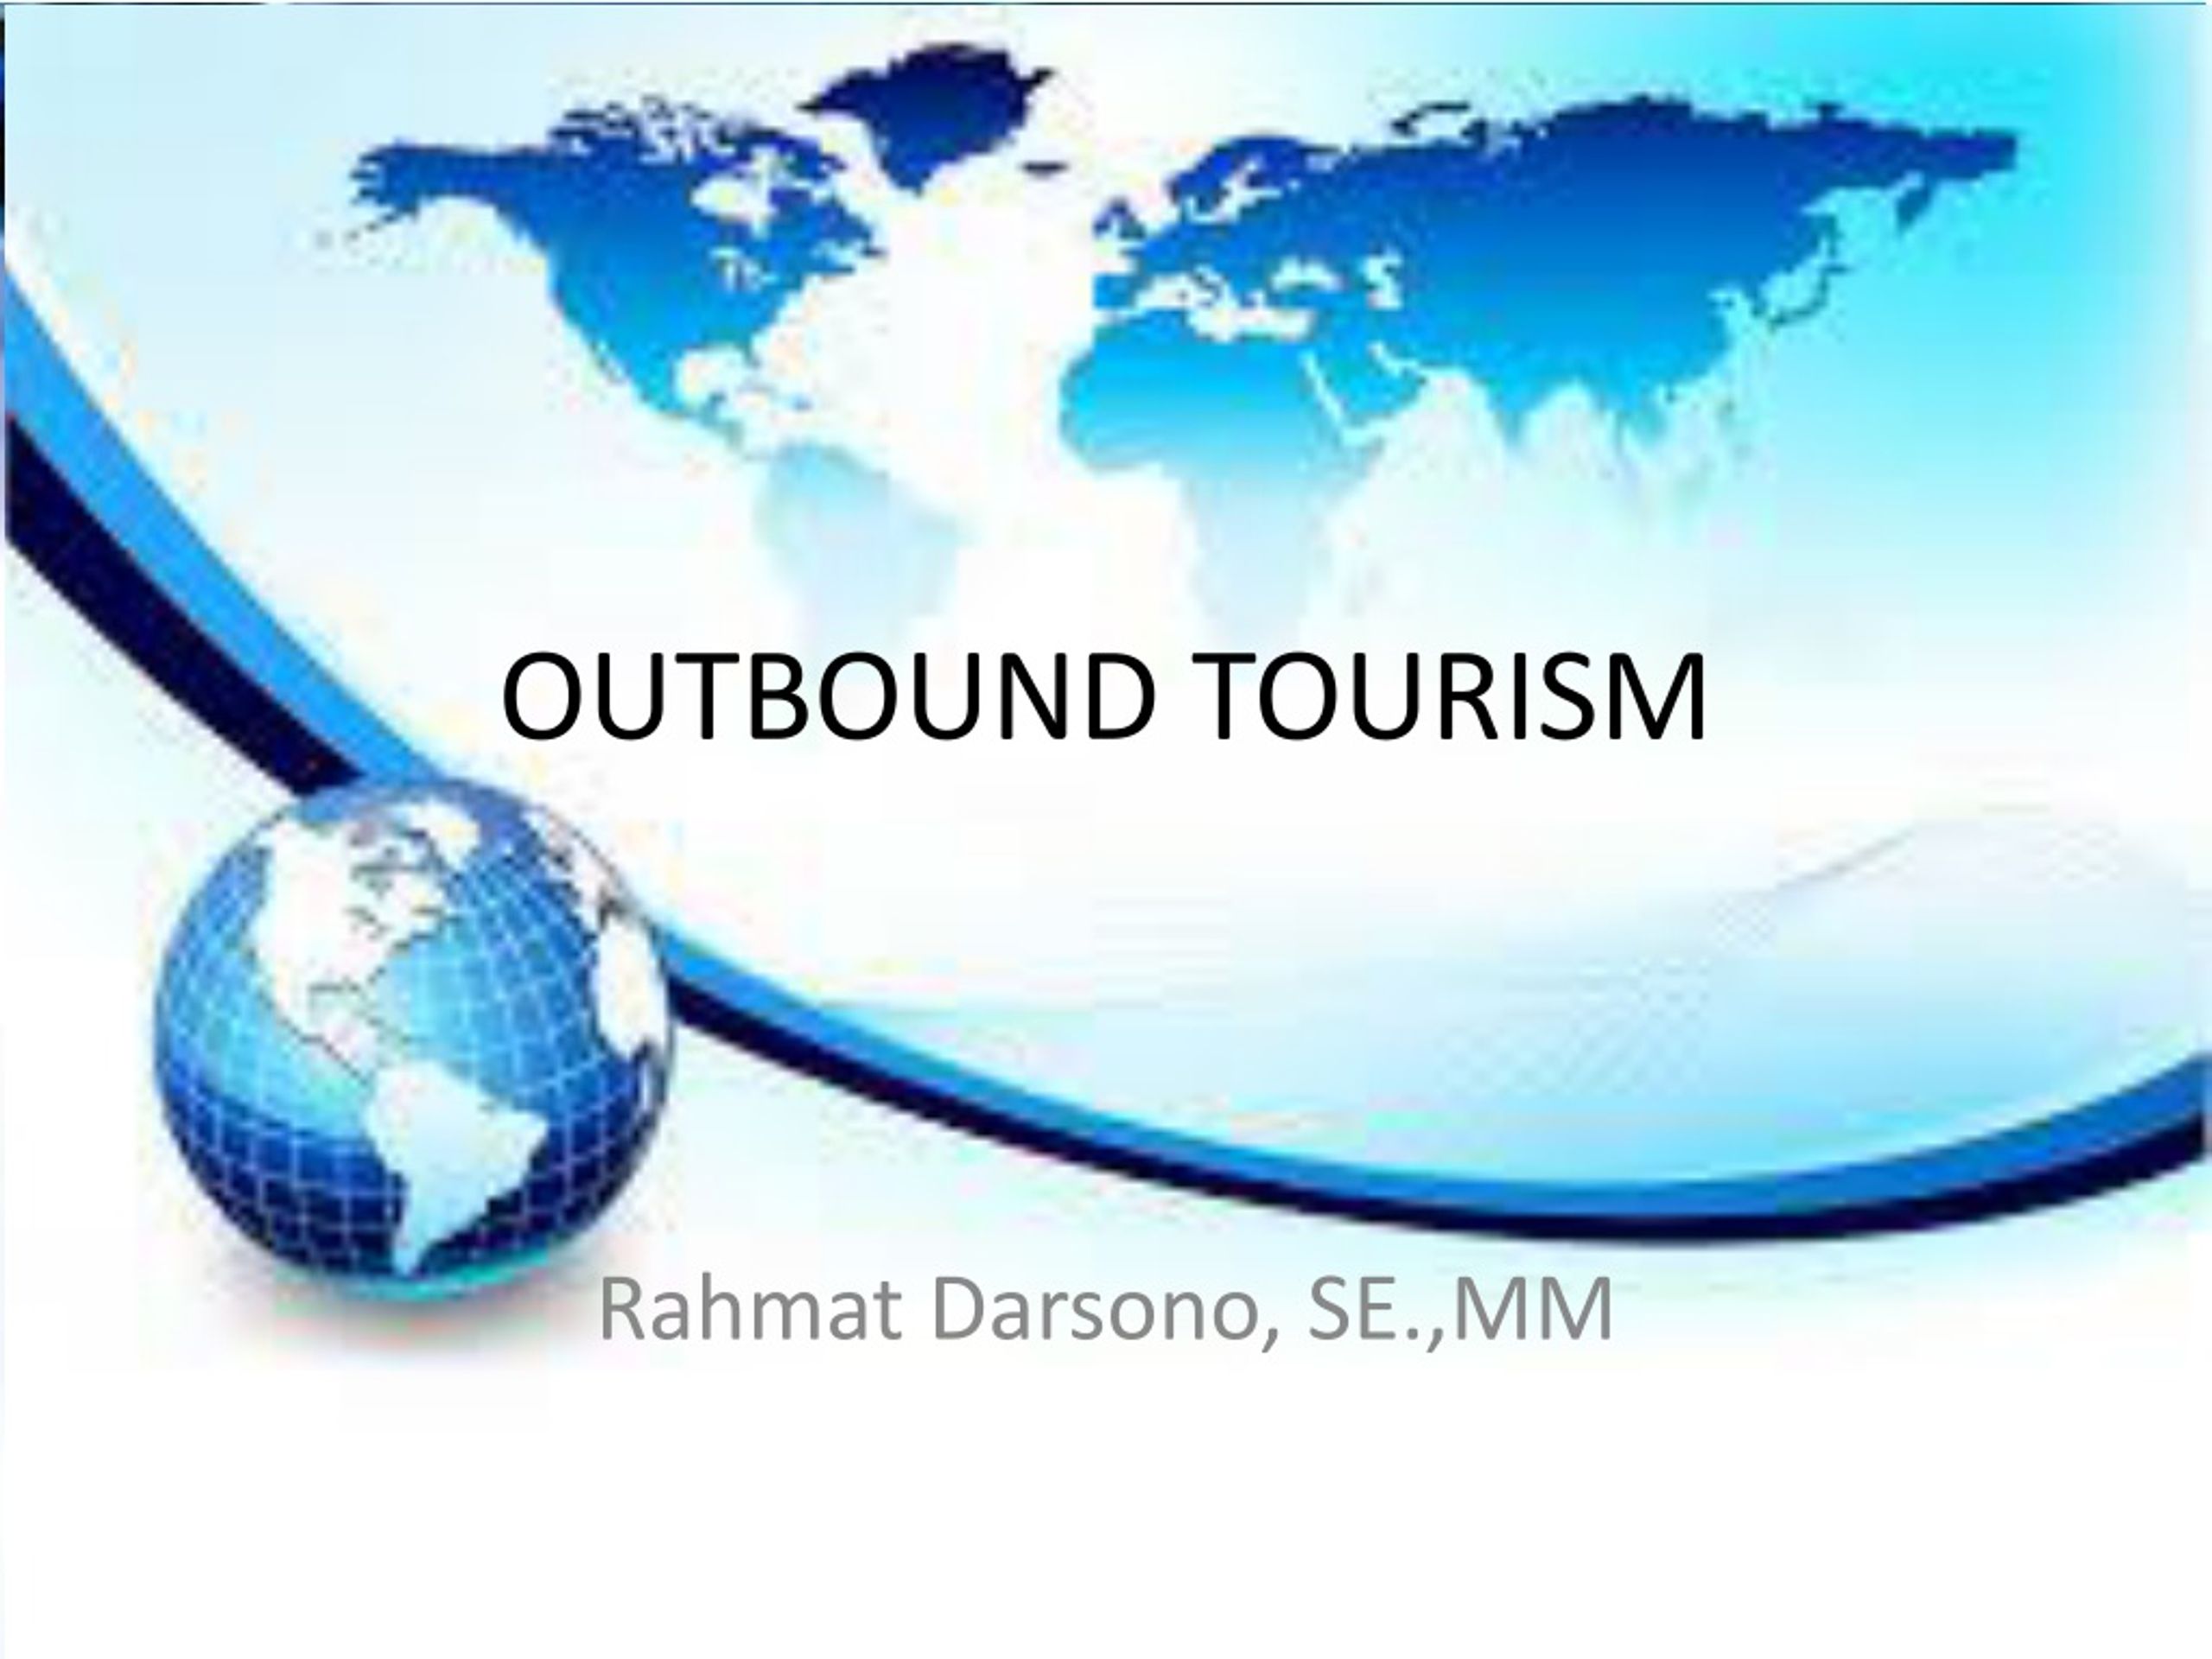 outbound tourism is